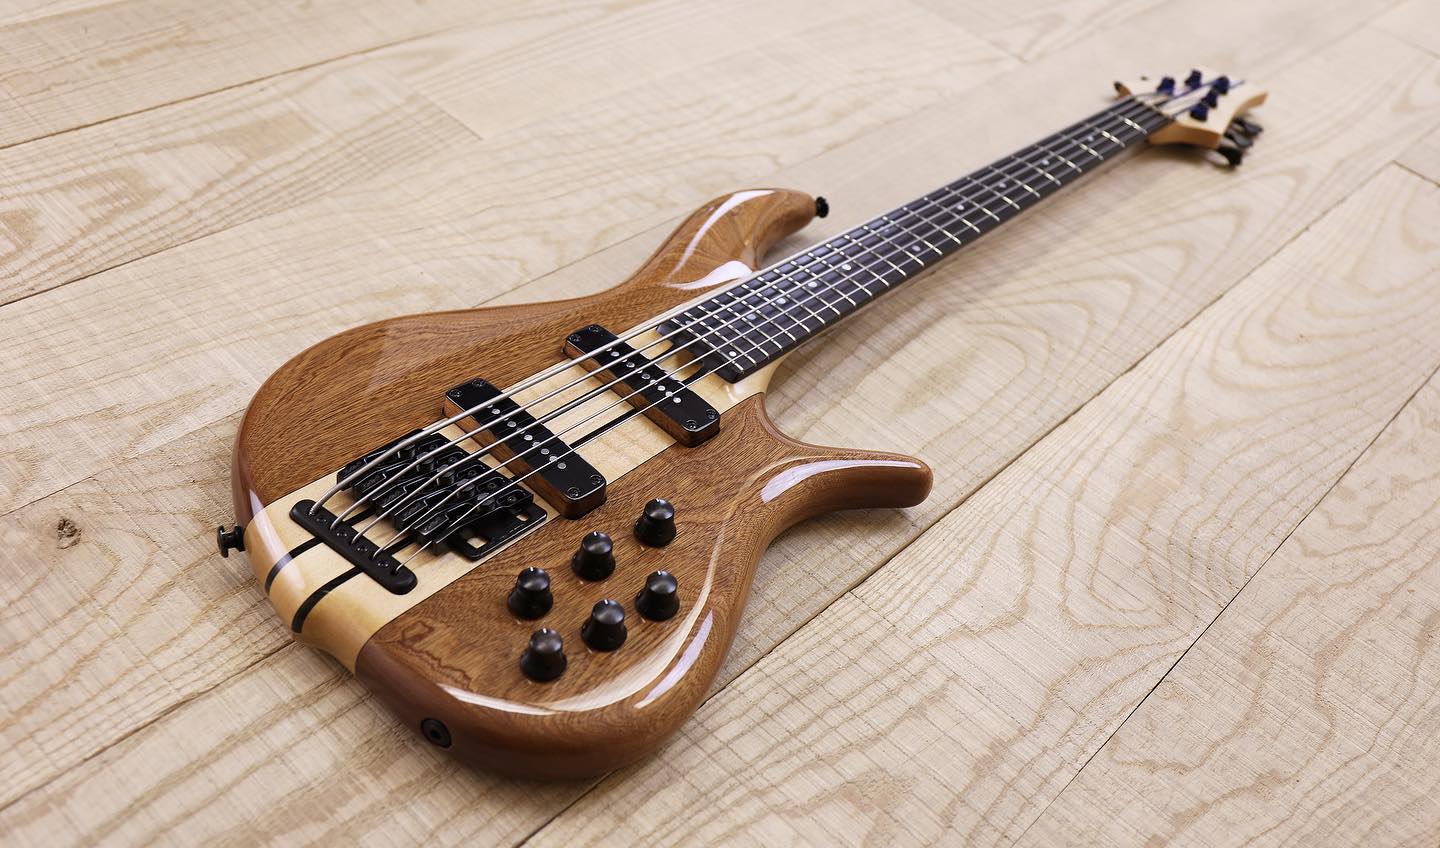 How To Measure Bass Guitar Scale Length